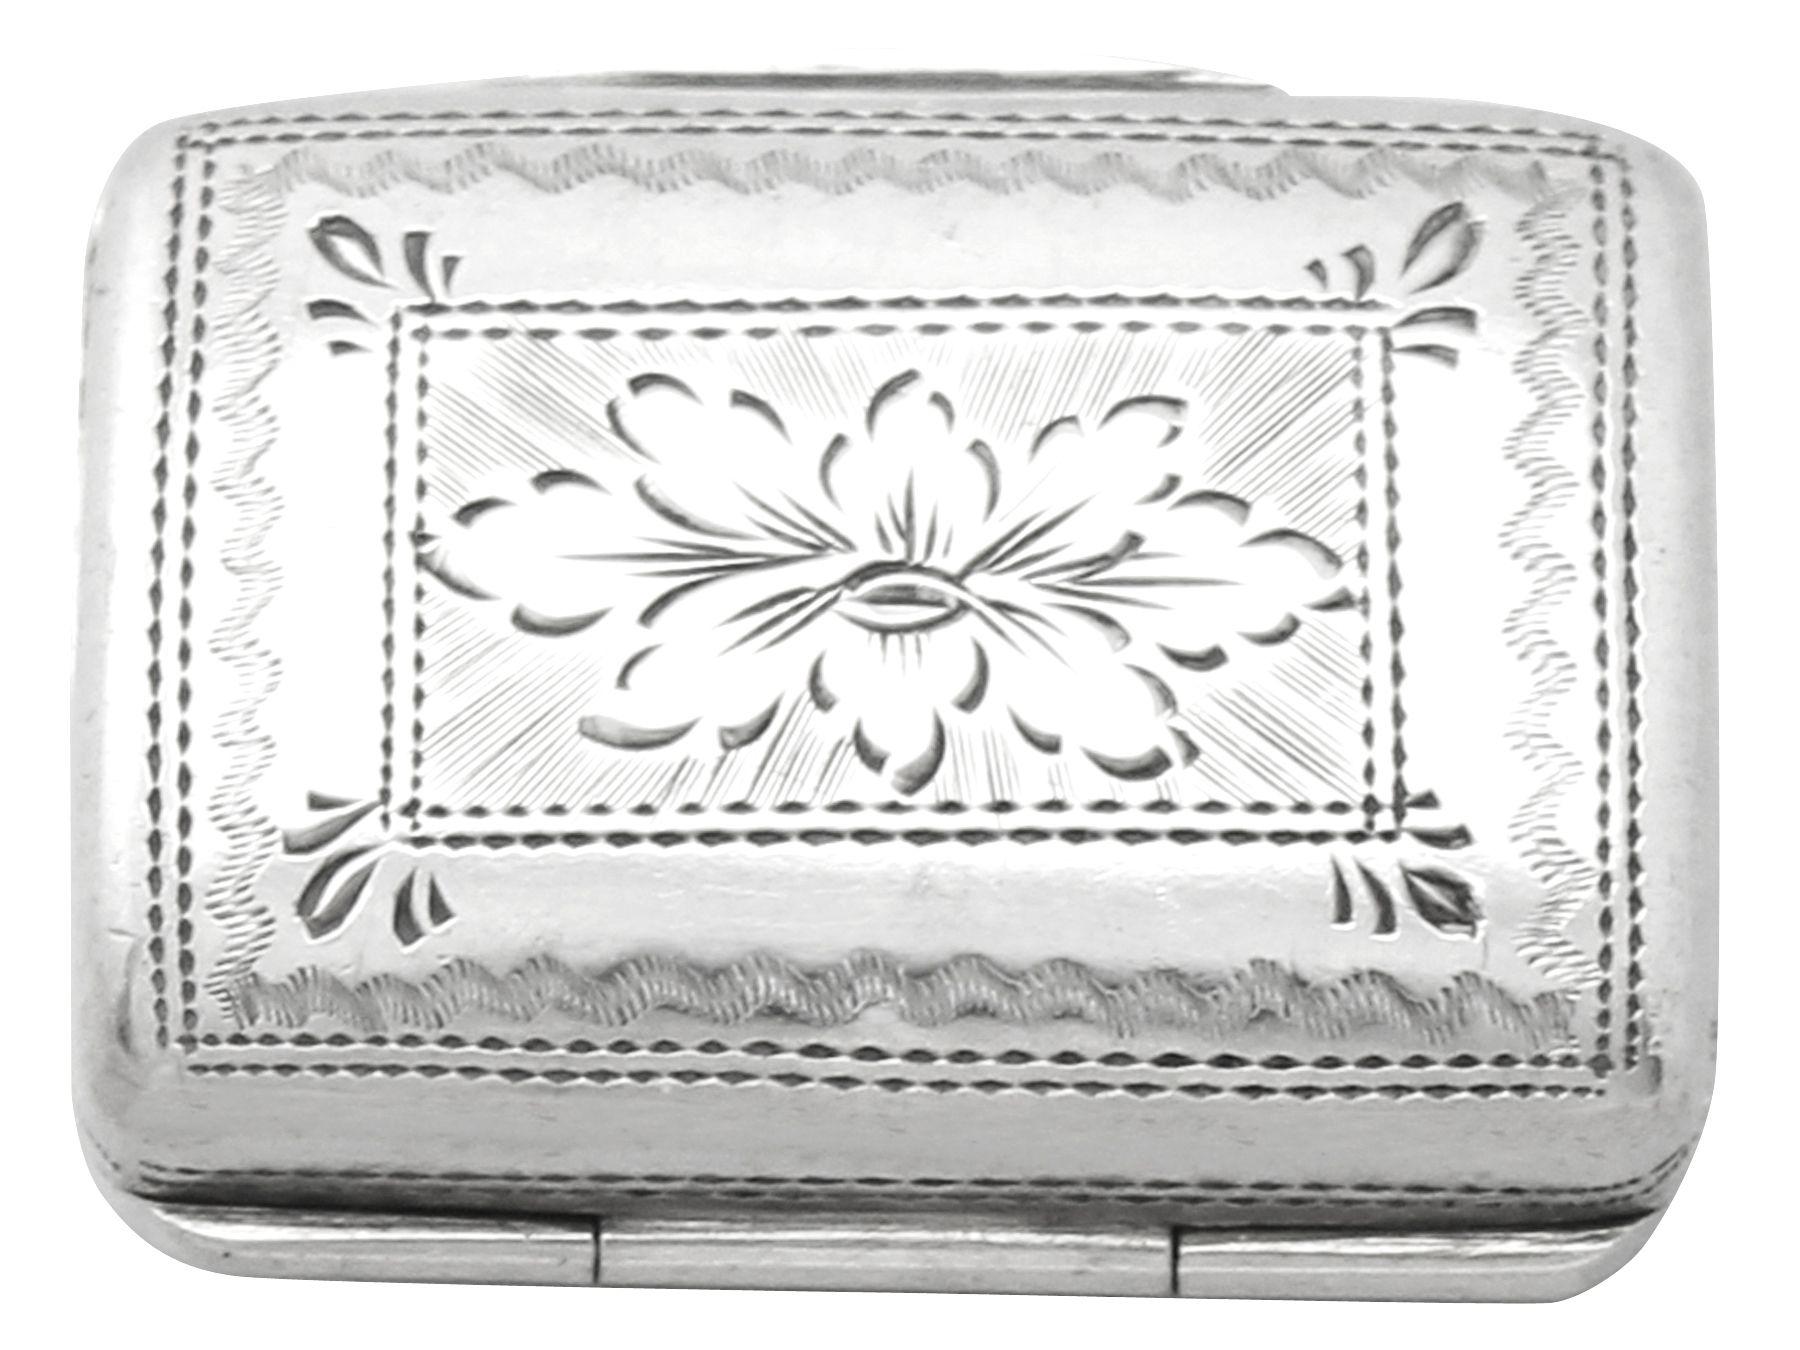 A fine and impressive antique George IV English sterling silver vinaigrette in the form of a purse; an addition to our silver boxes collection.

This antique George IV sterling silver vinaigrette has been realistically modeled in the form of a